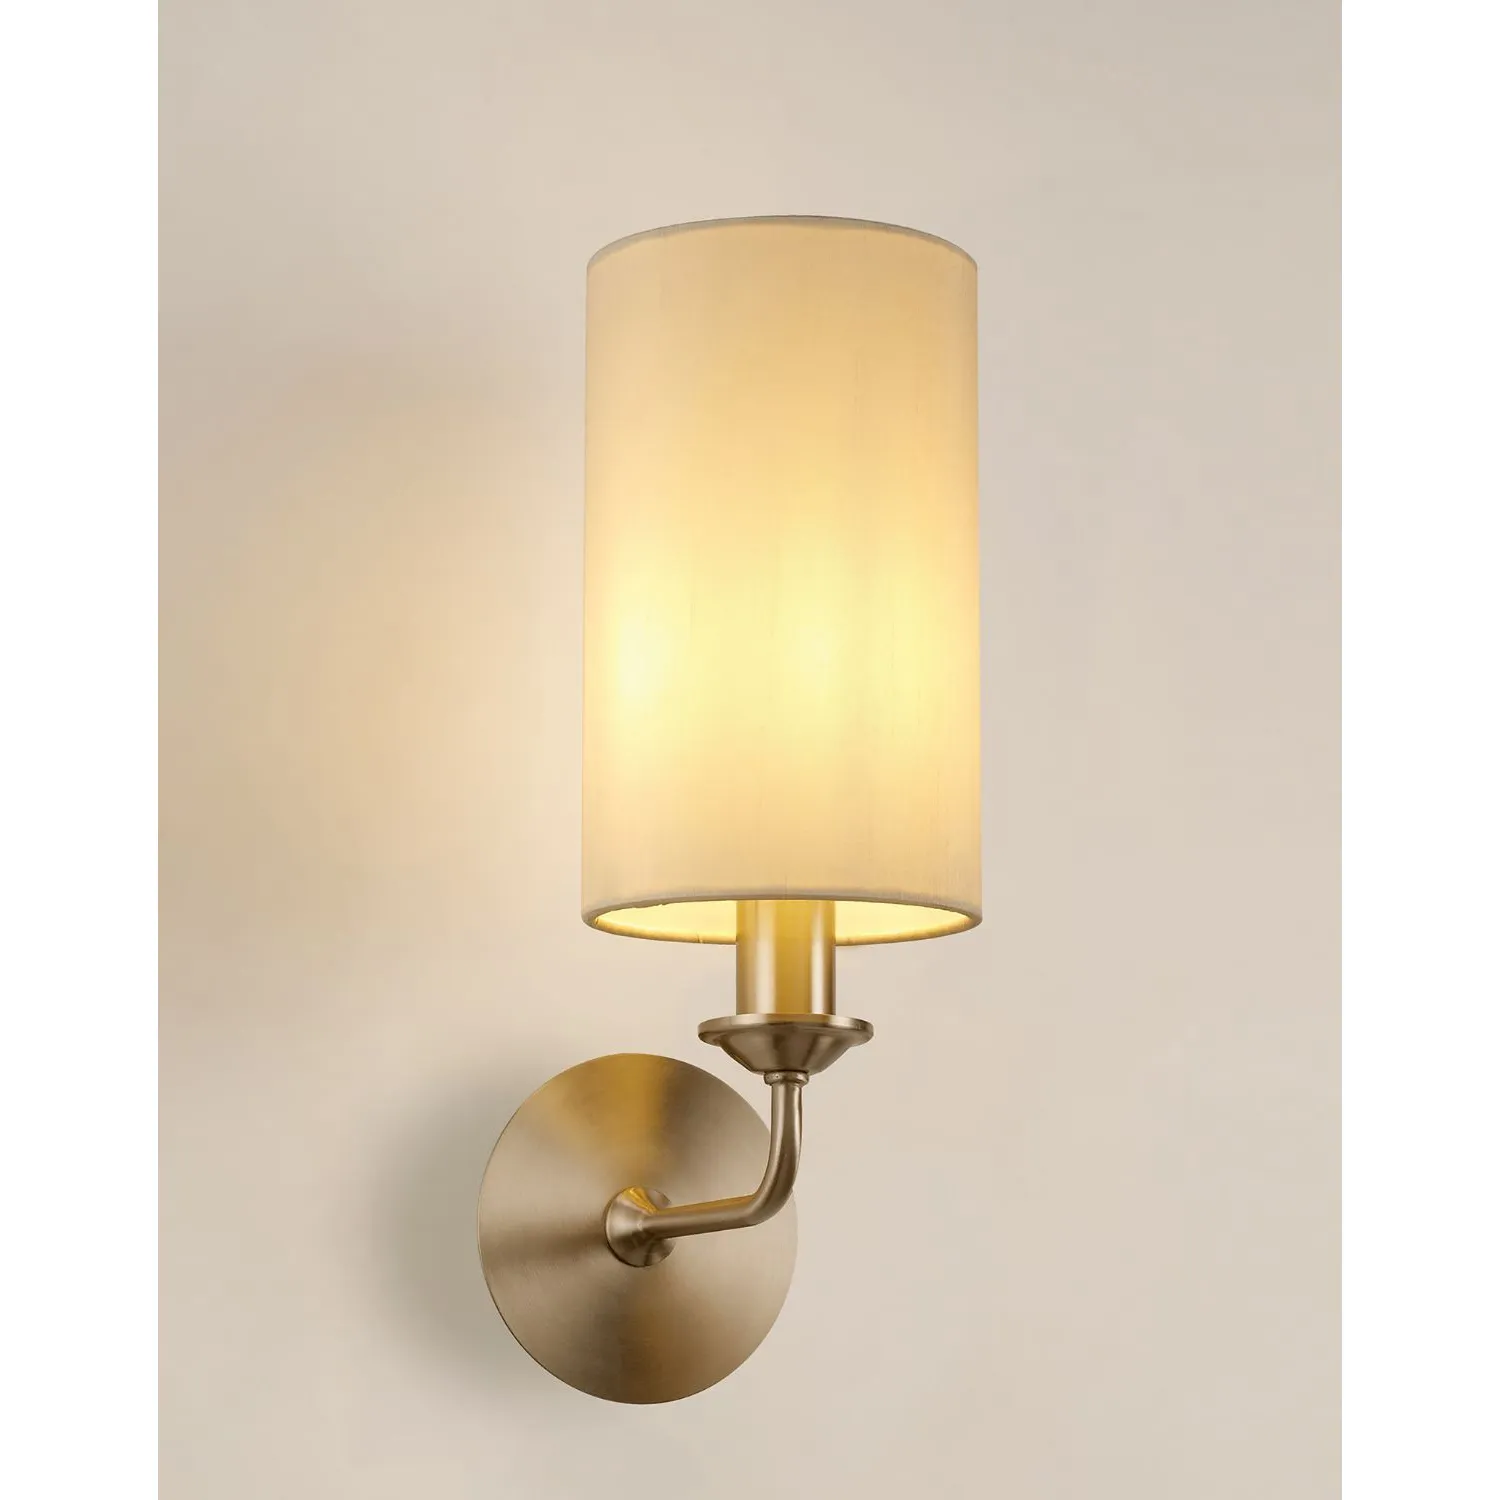 Banyan 1 Light Switched Wall Lamp, E14 Satin Nickel c w 120mm Faux Silk Shade, Ivory Pearl White Laminate